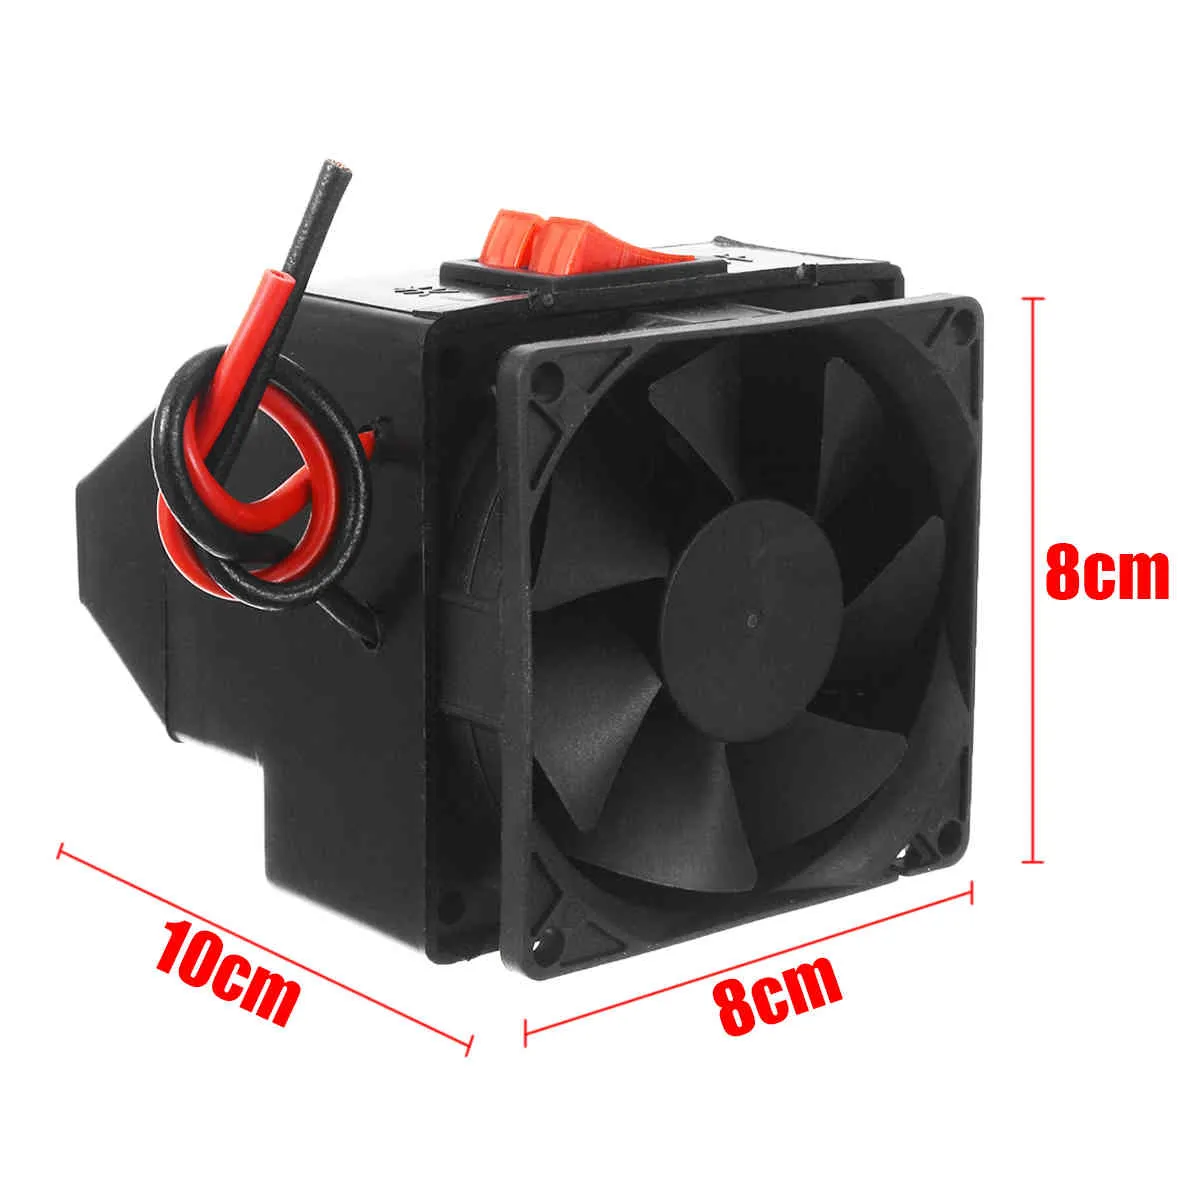 12V 300W Car Vehicle Heating Heater Hot Fan Driving Defroster Demister For Vehicle Portable Temperature Control Device